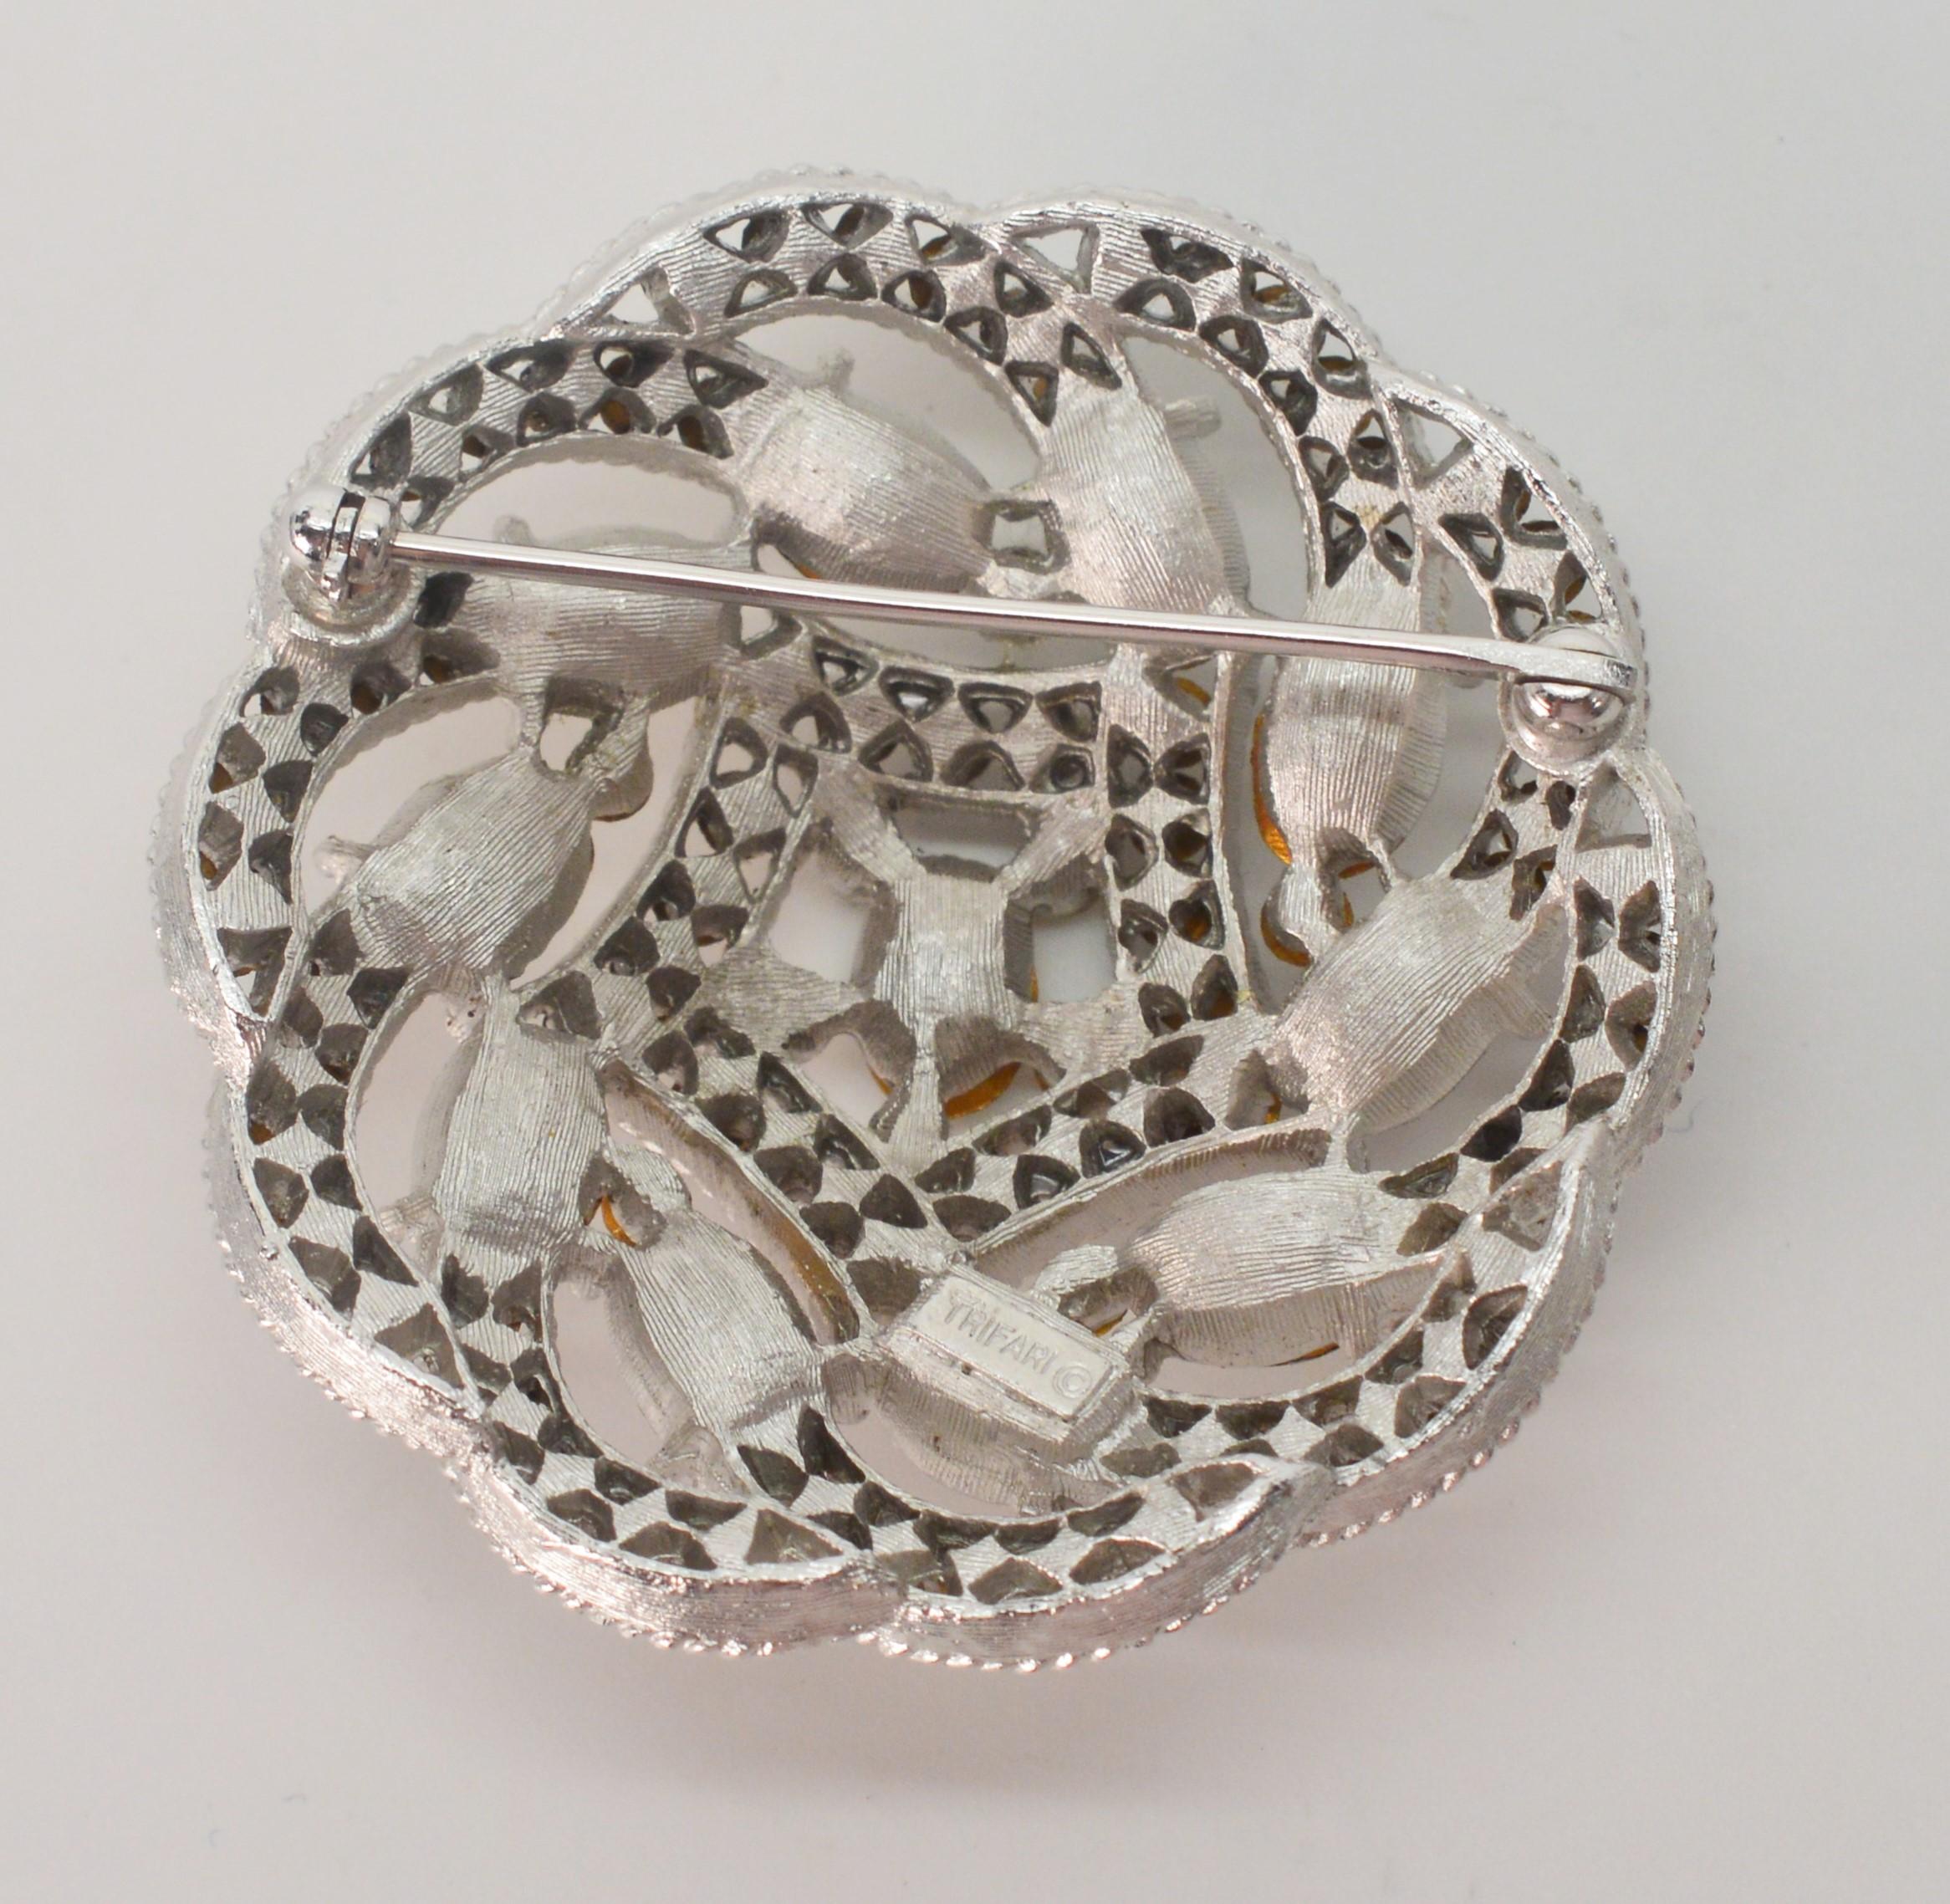 A vintage classic,  this beautifully designed costume brooch with its clear oval rhinestones lights up any outfit with brilliance.
Measuring 1-7/8 inch round and in excellent condition with only light wear. Makers silver-toned base metal and stamped